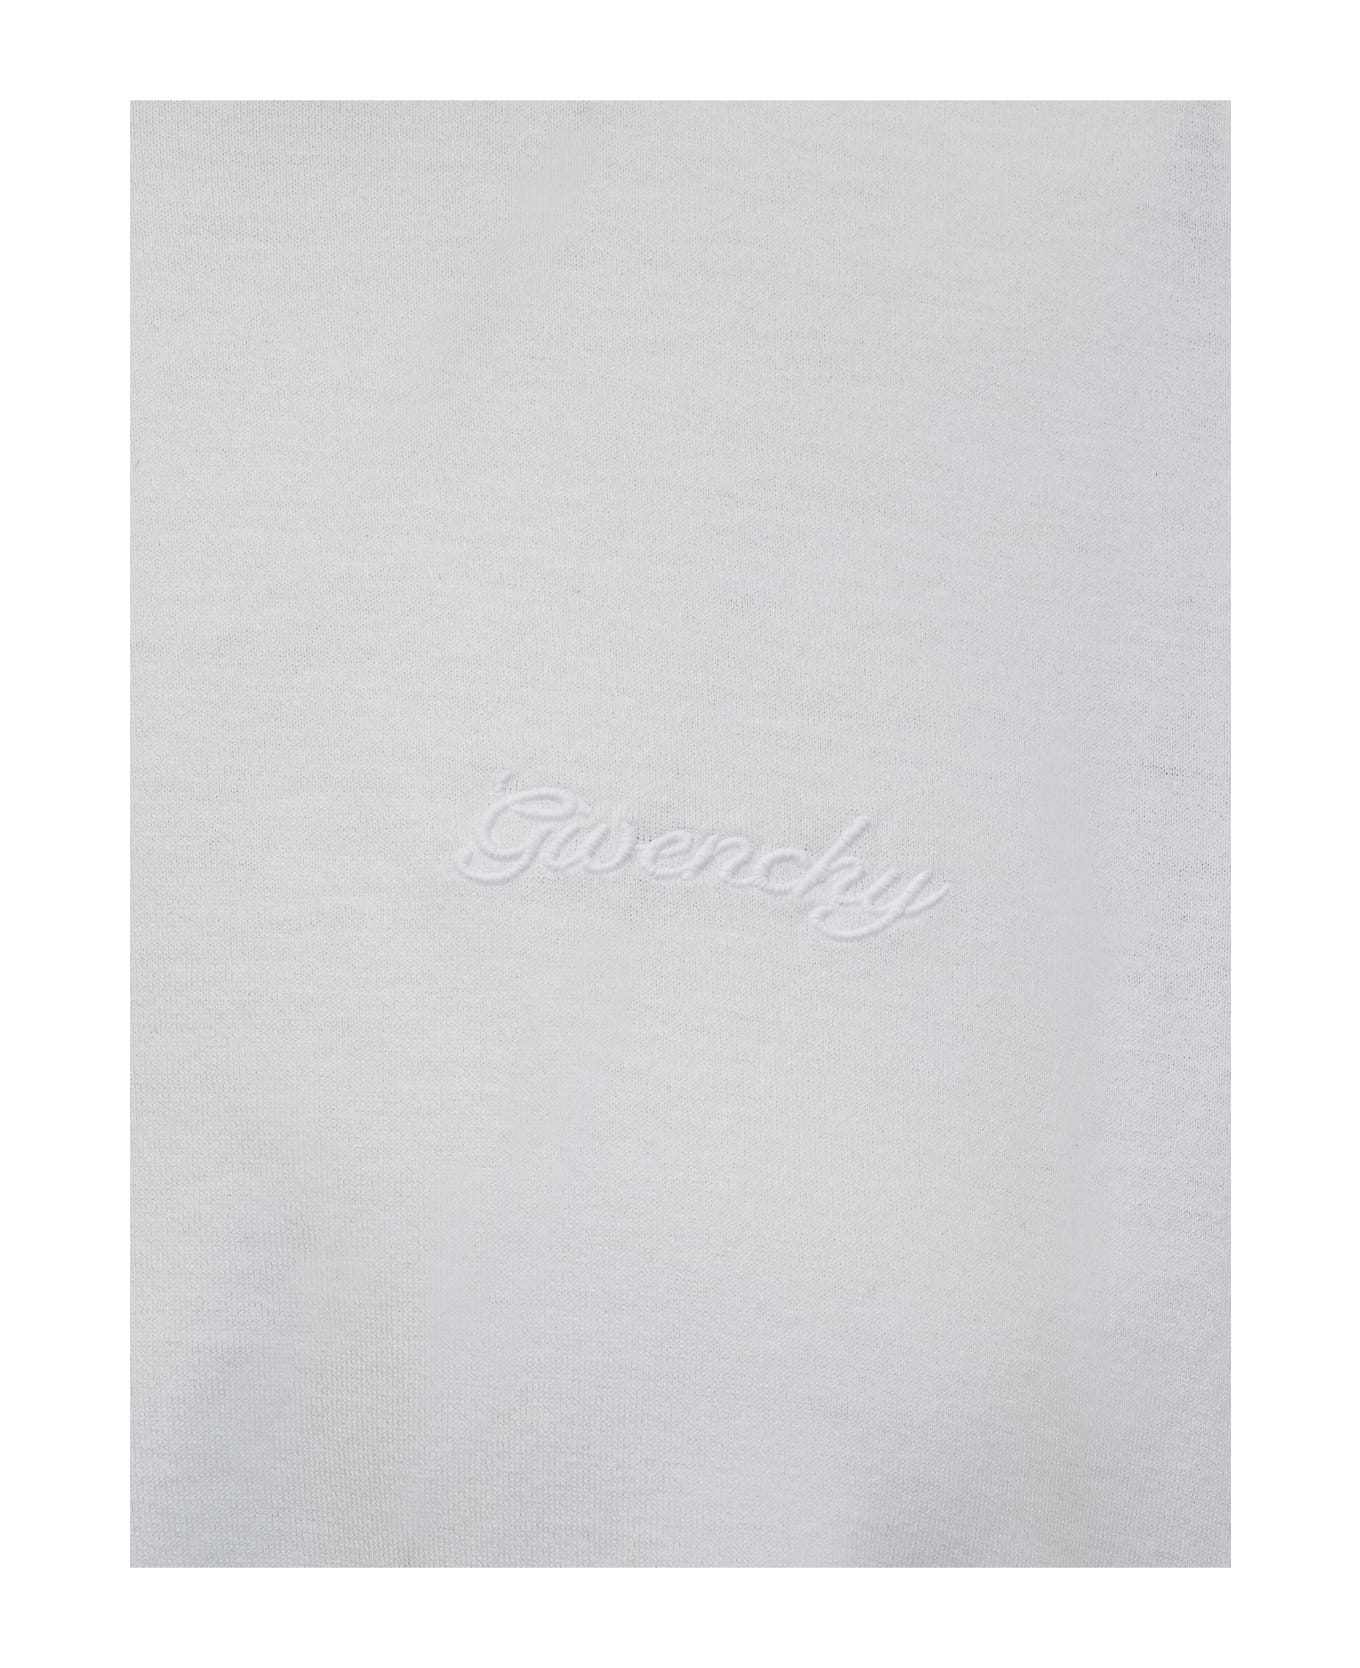 Givenchy T-shirt With Logo - WHITE